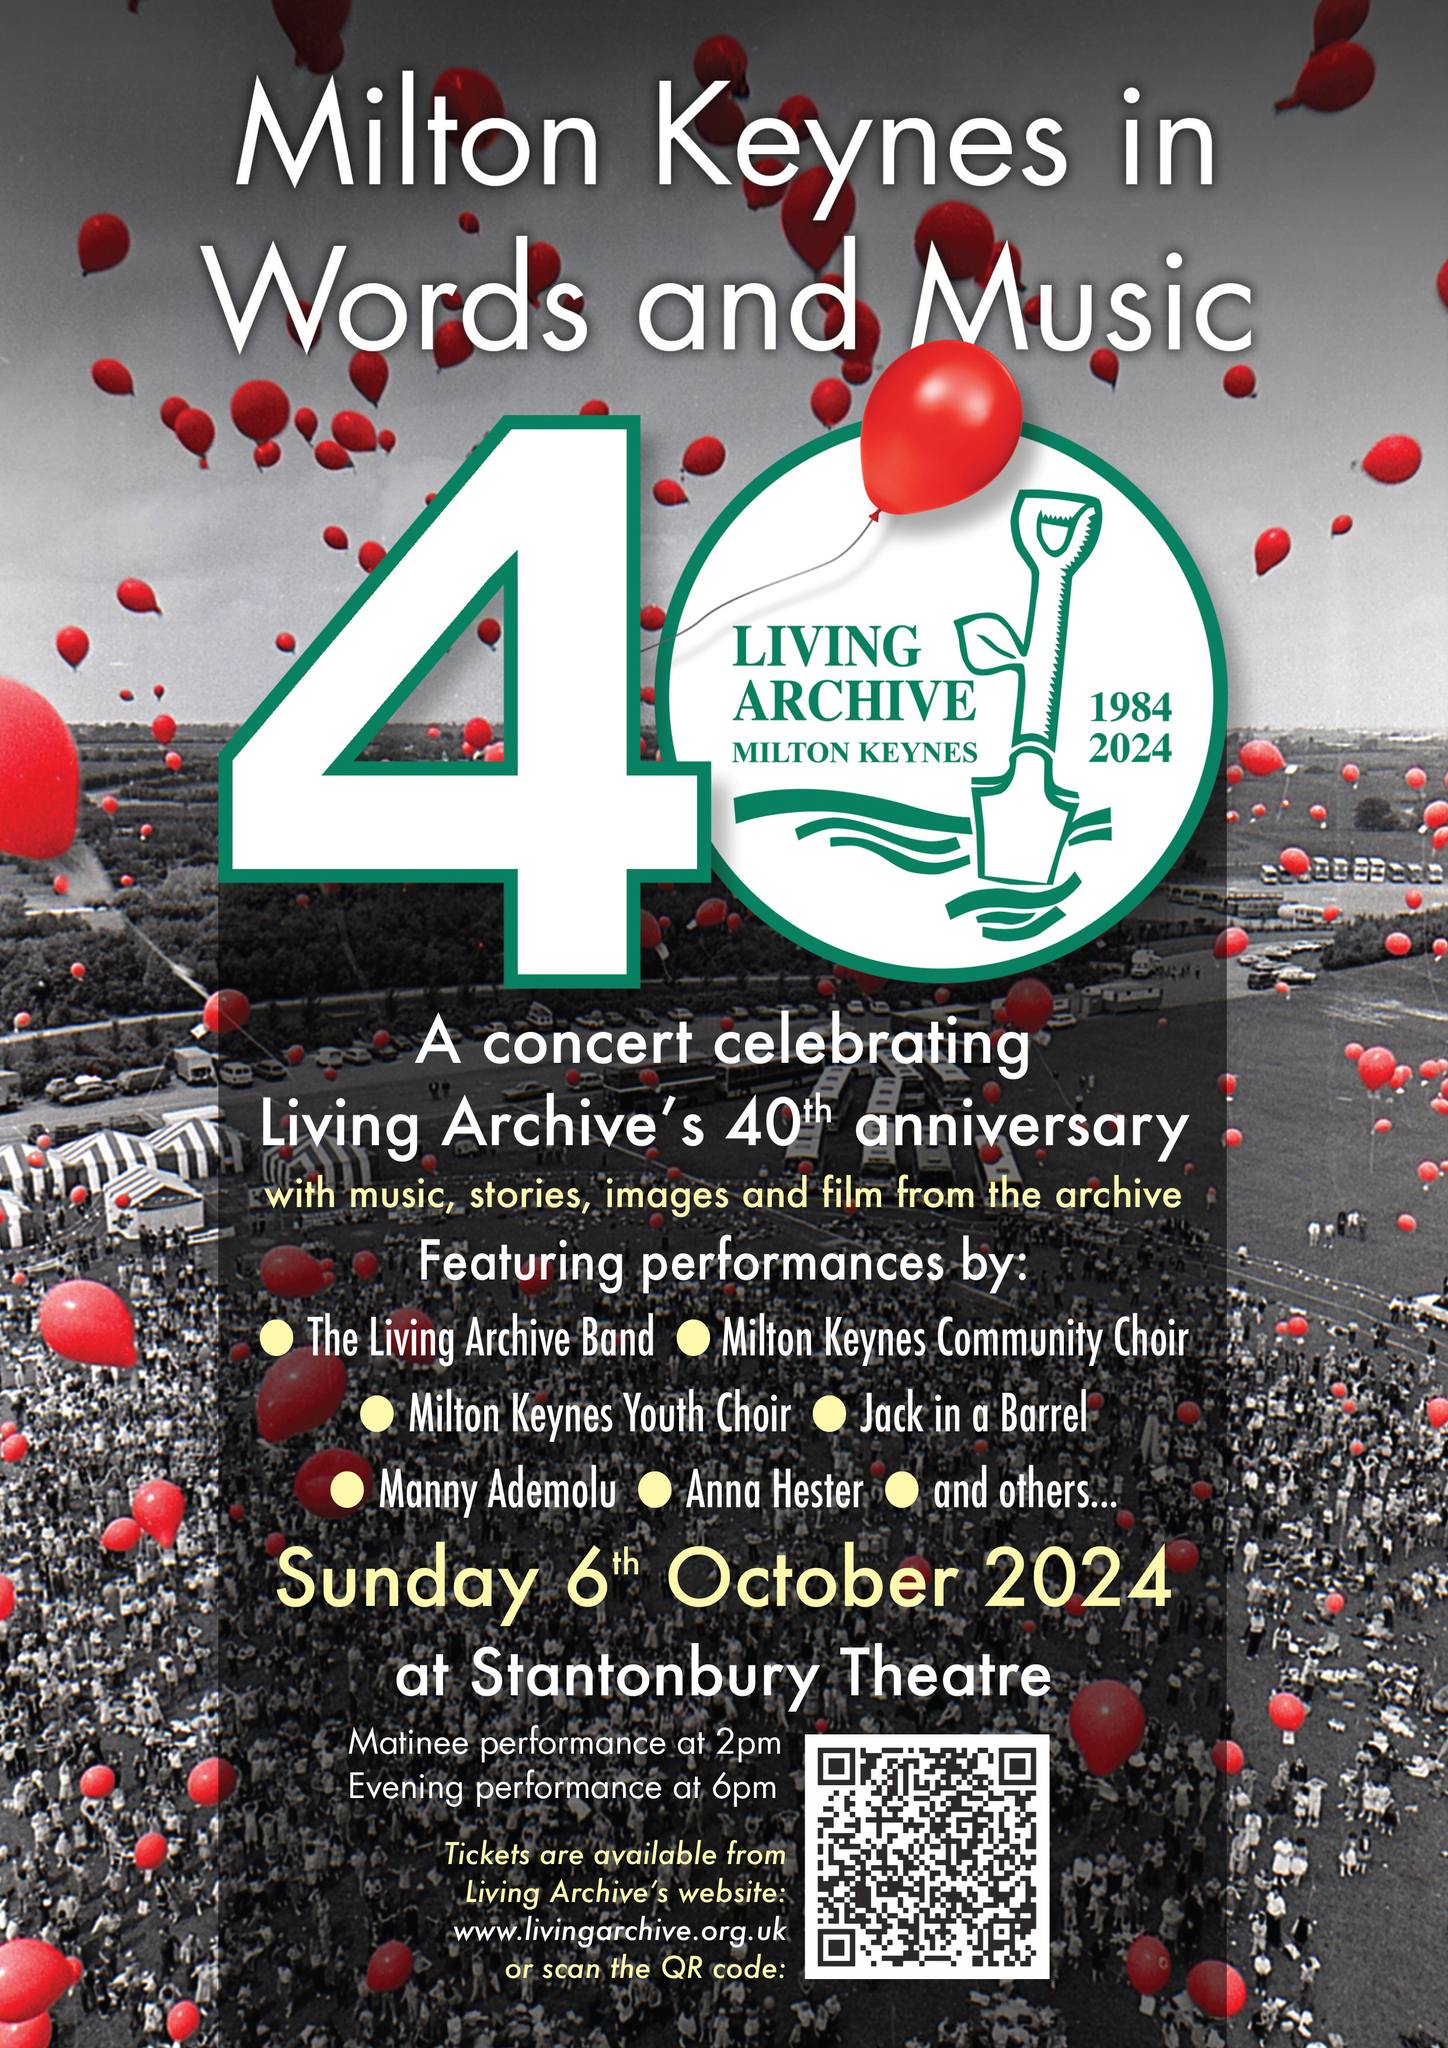 Concert with the Living Archive Band